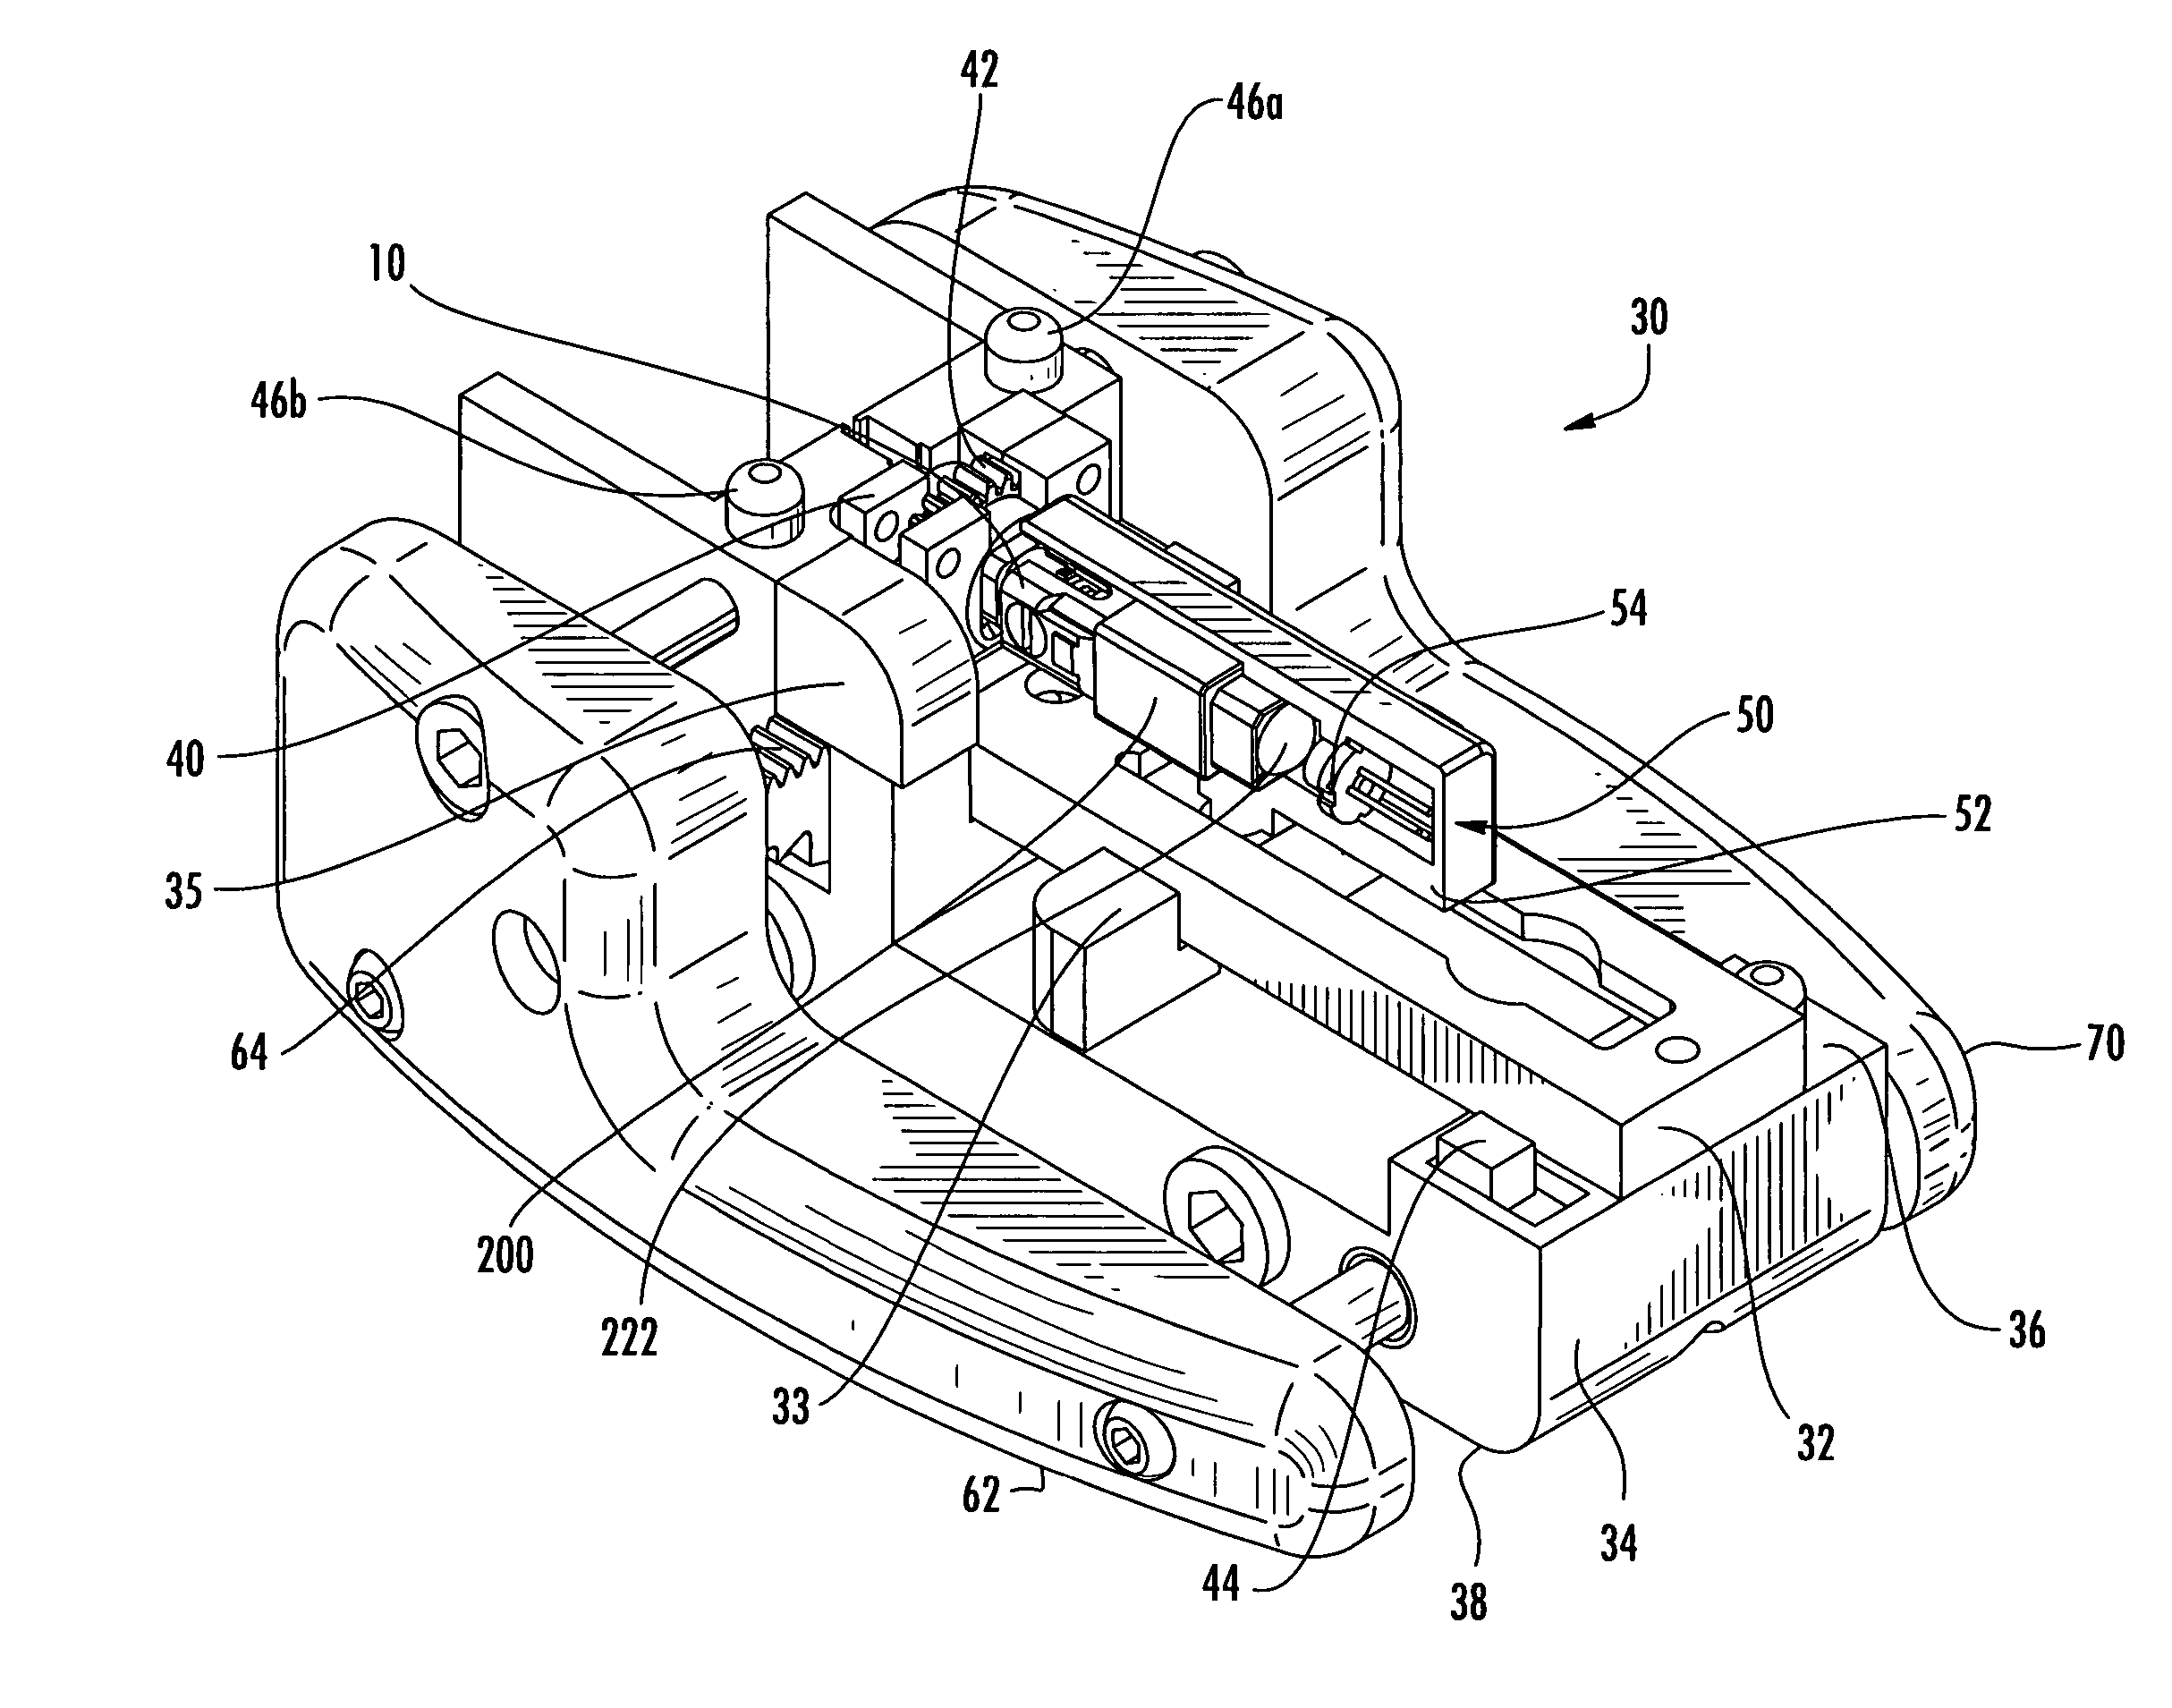 Installation tool with integrated visual fault indicator for field-installable mechanical splice connector